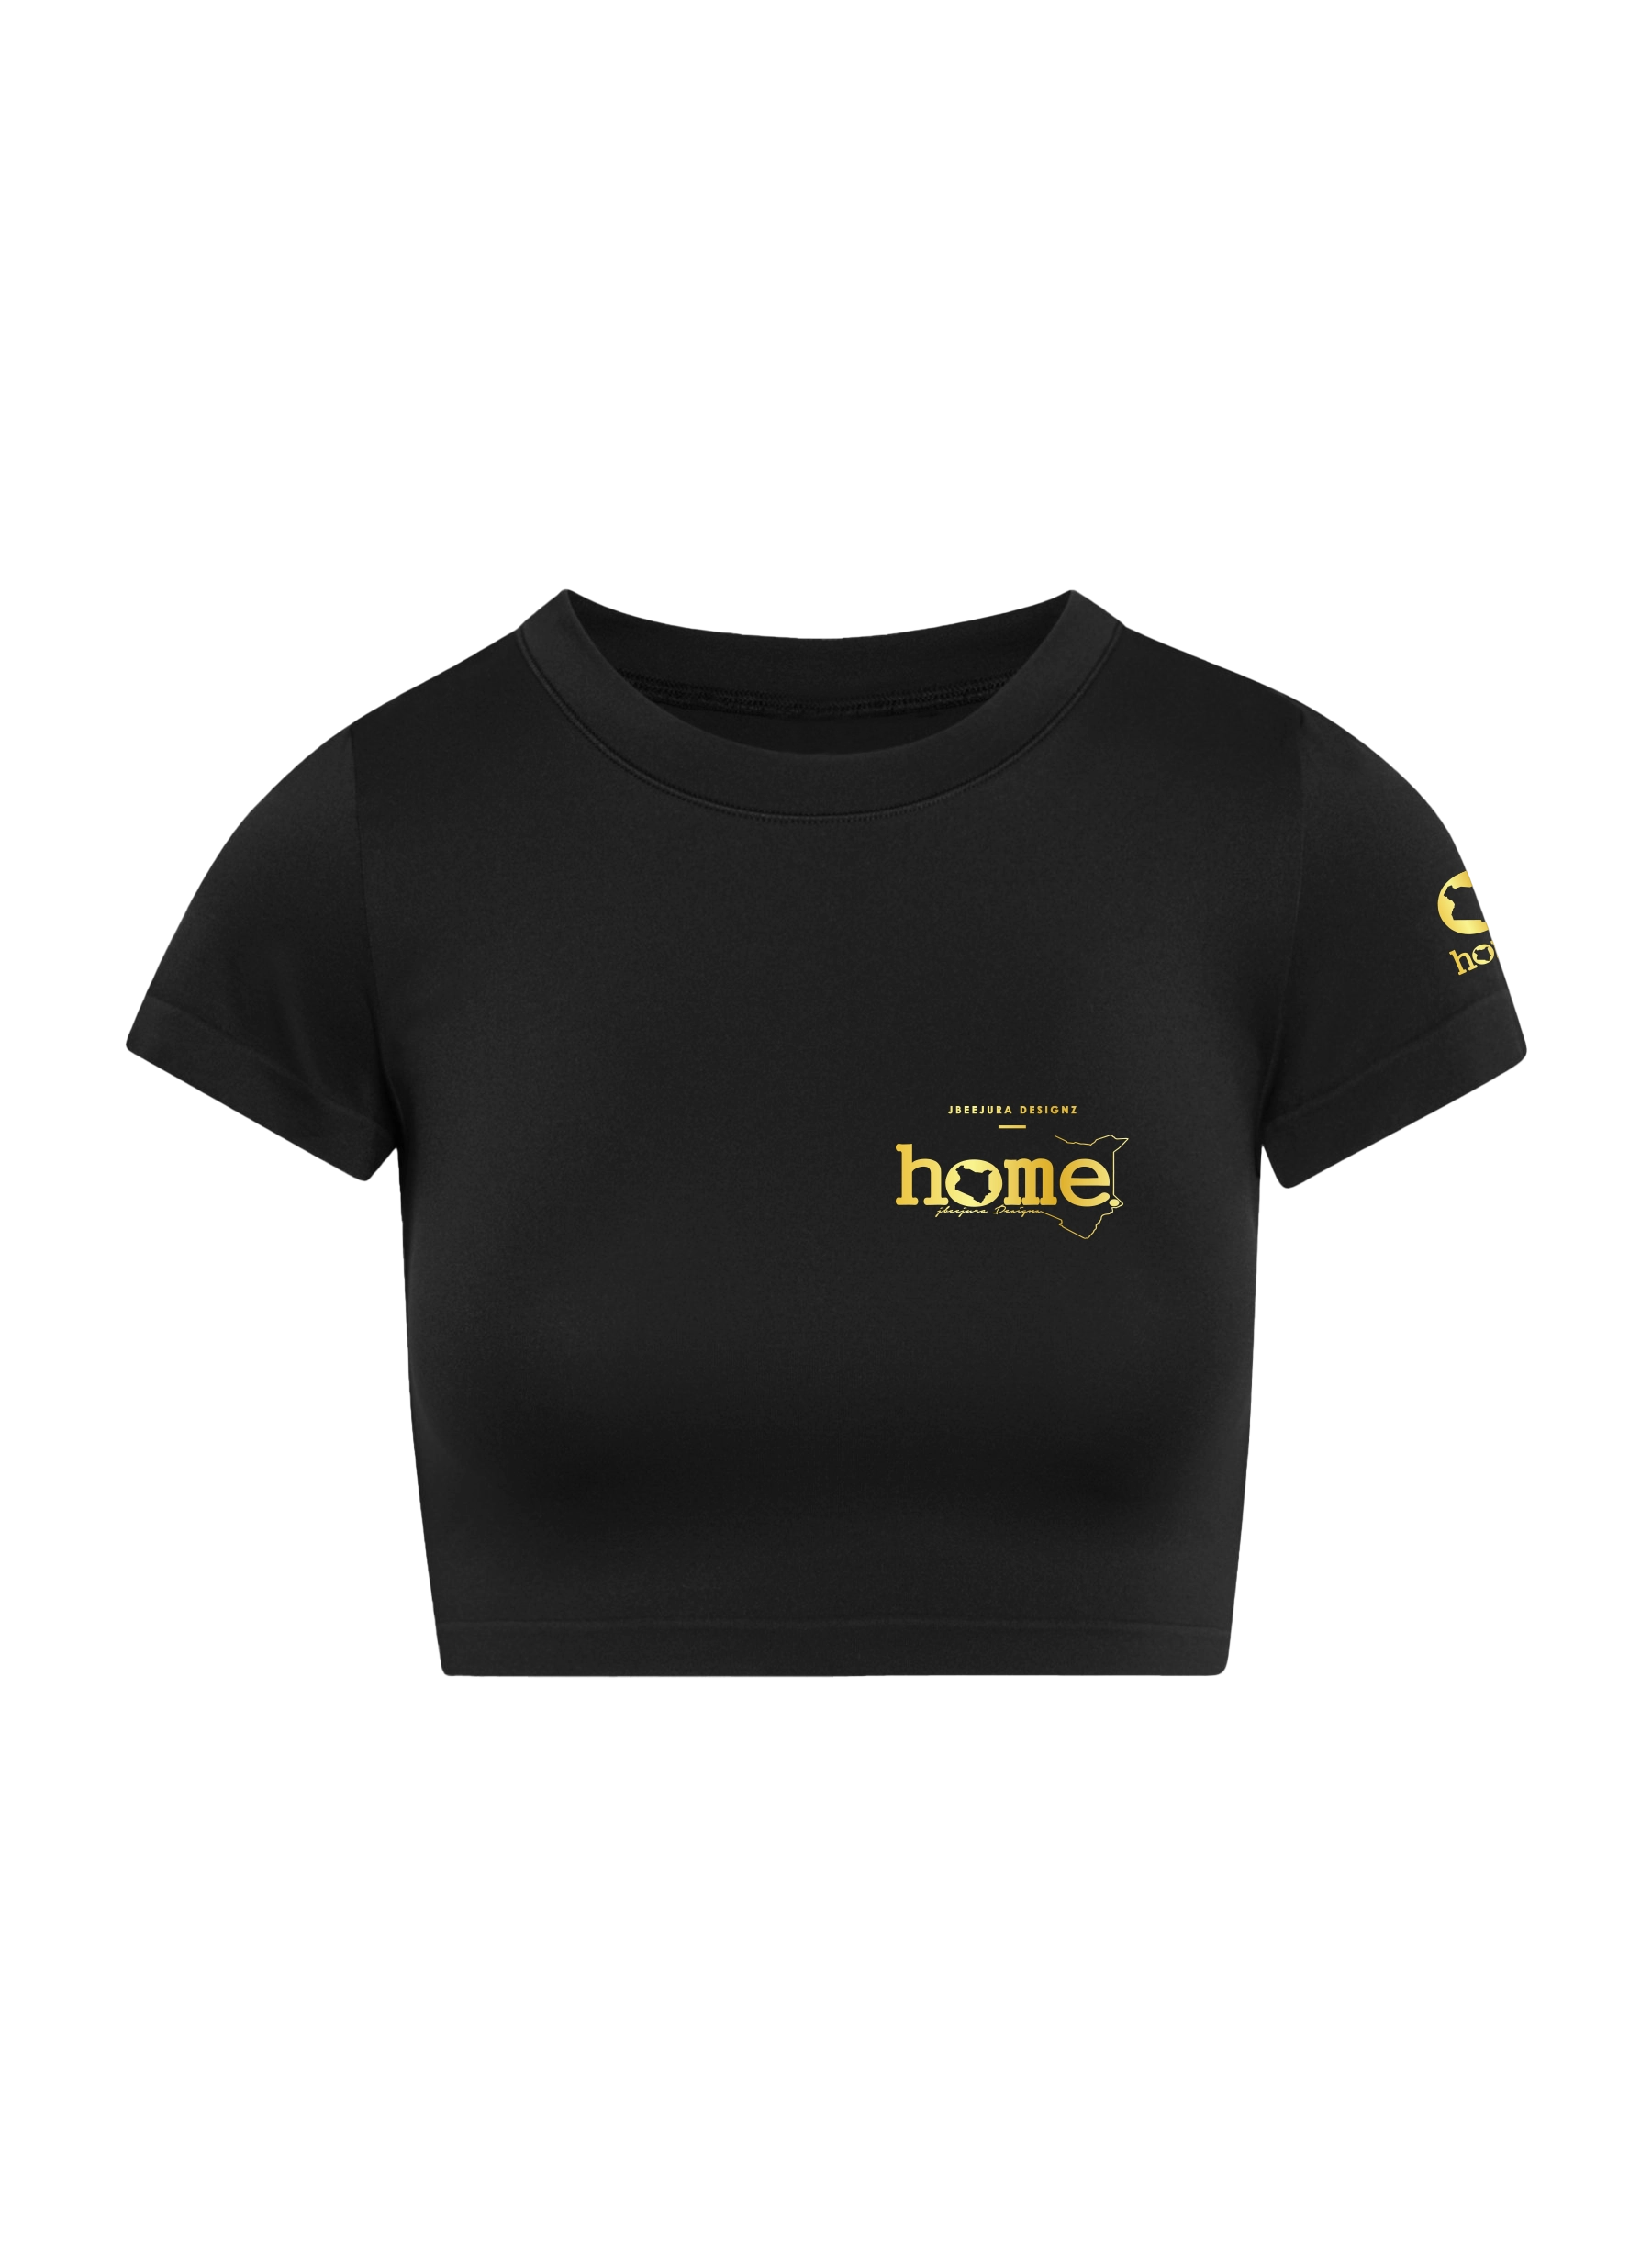 home_254 SHORT SLEEVED BLACK CROPPED ARIA TEE WITH A GOLD 3D WORDS PRINT 